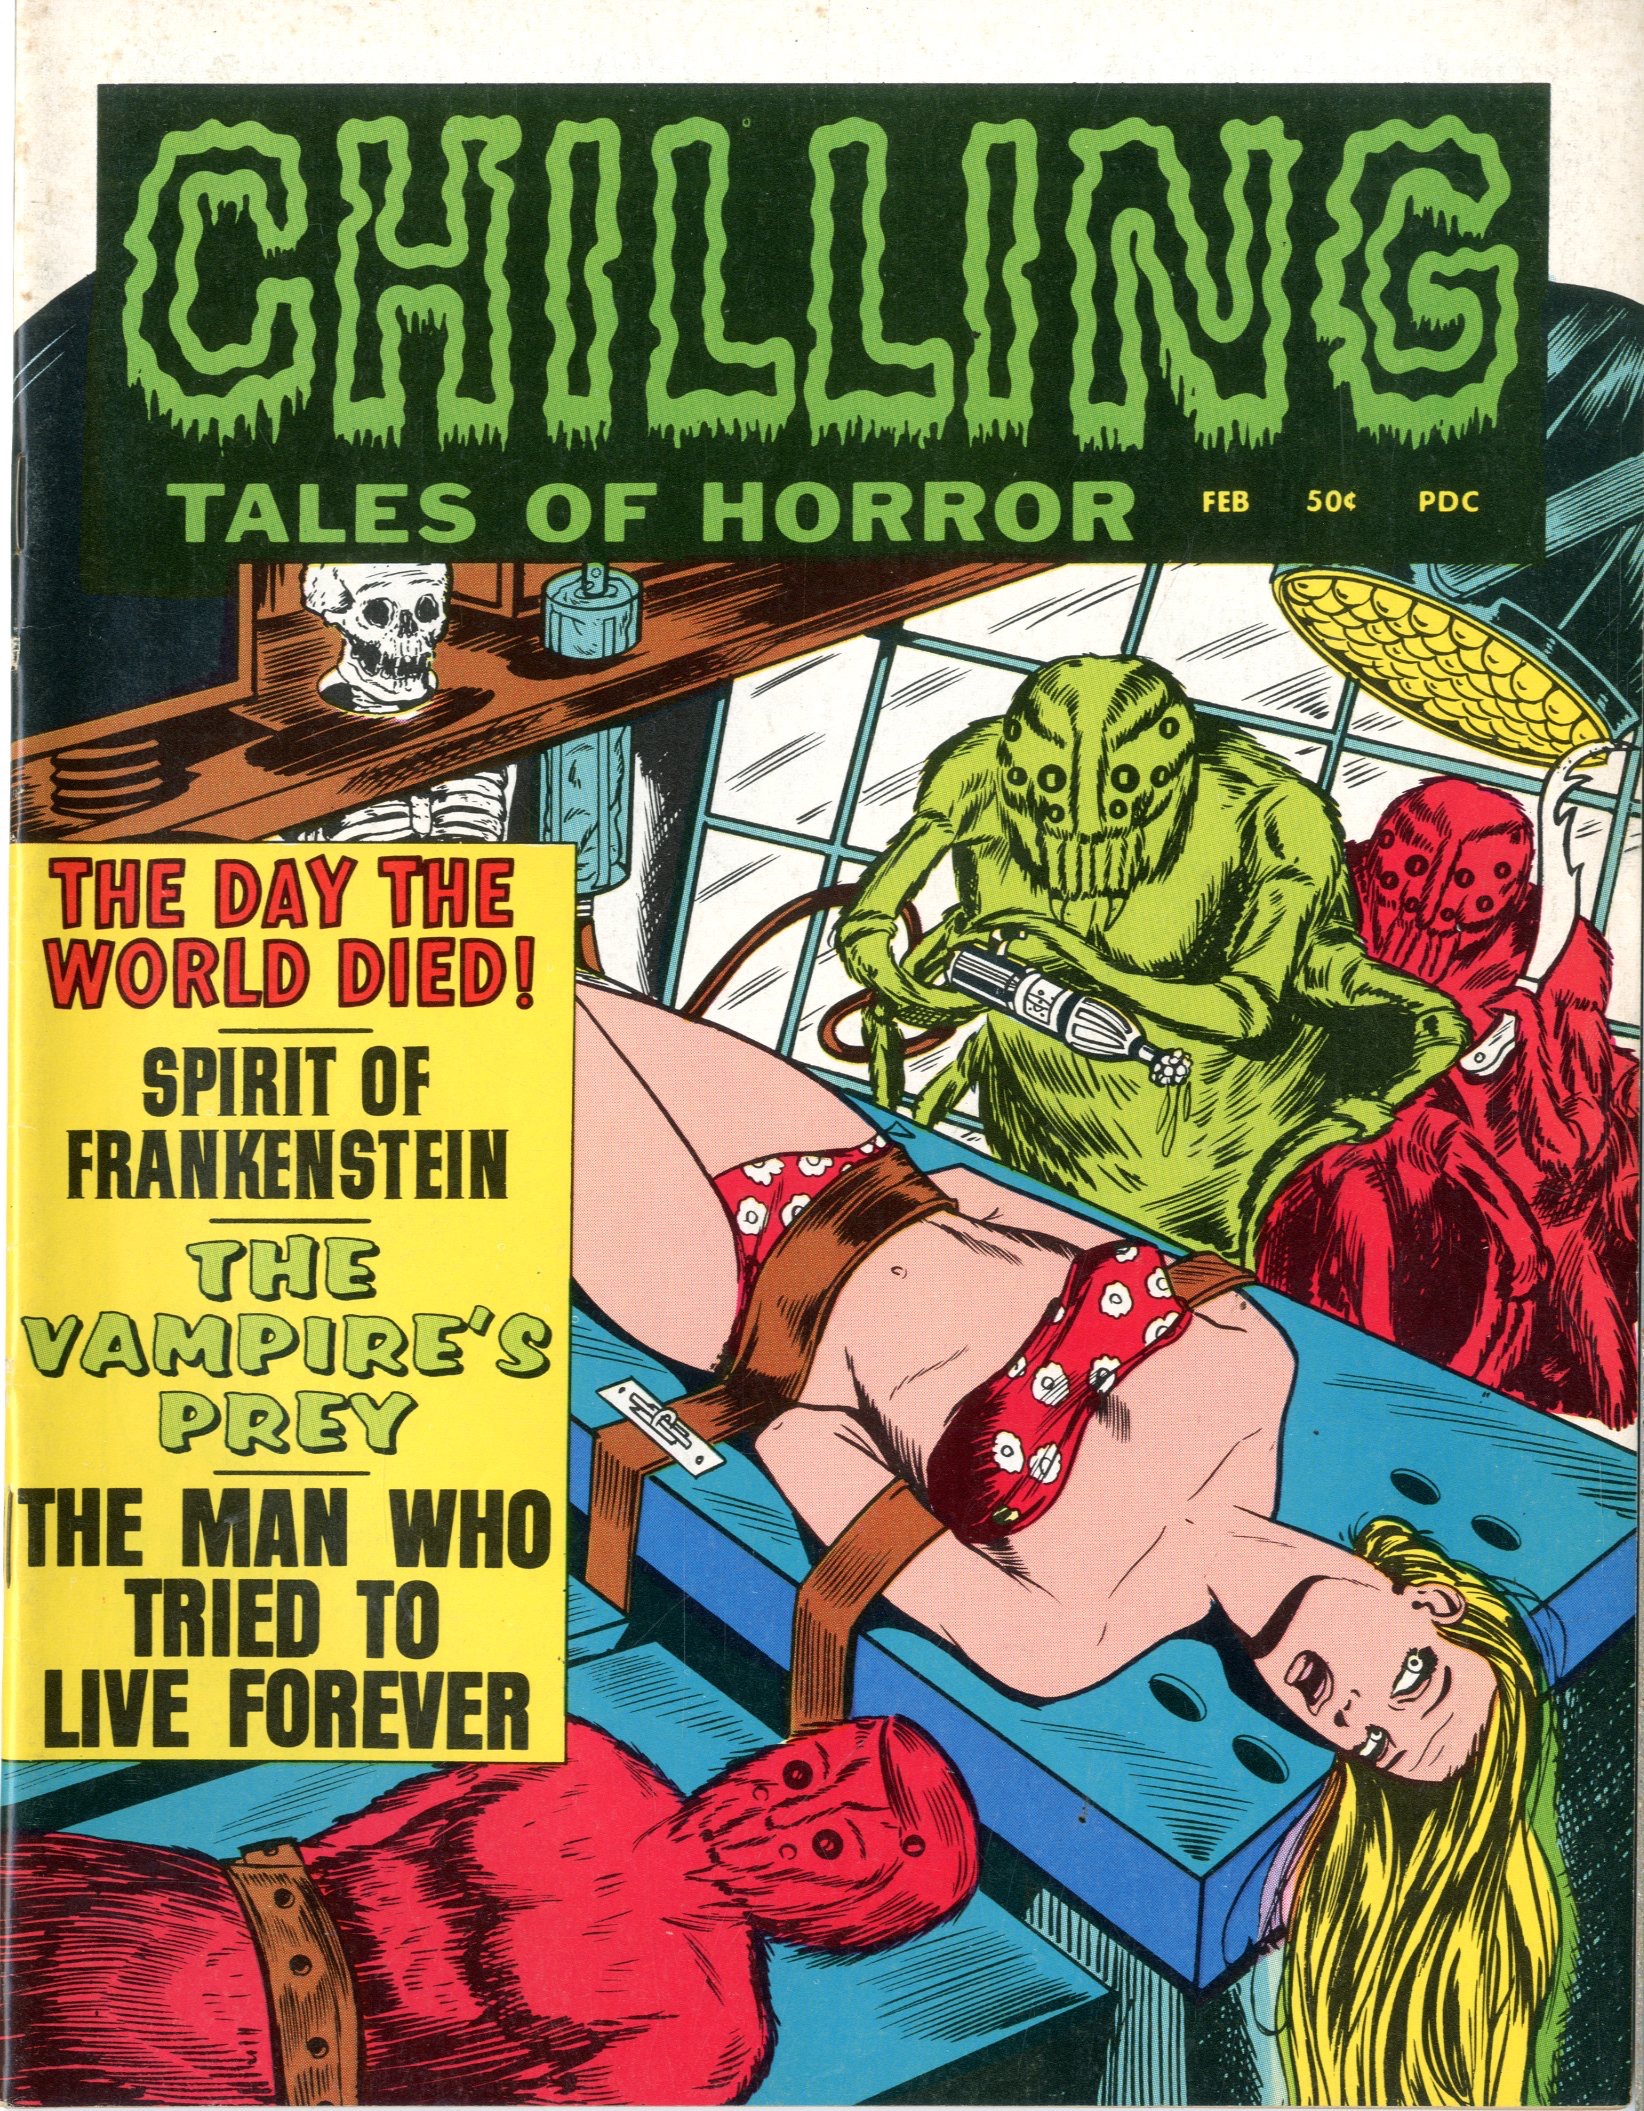 Chilling Tales Of Horror Vol 2 - Primary